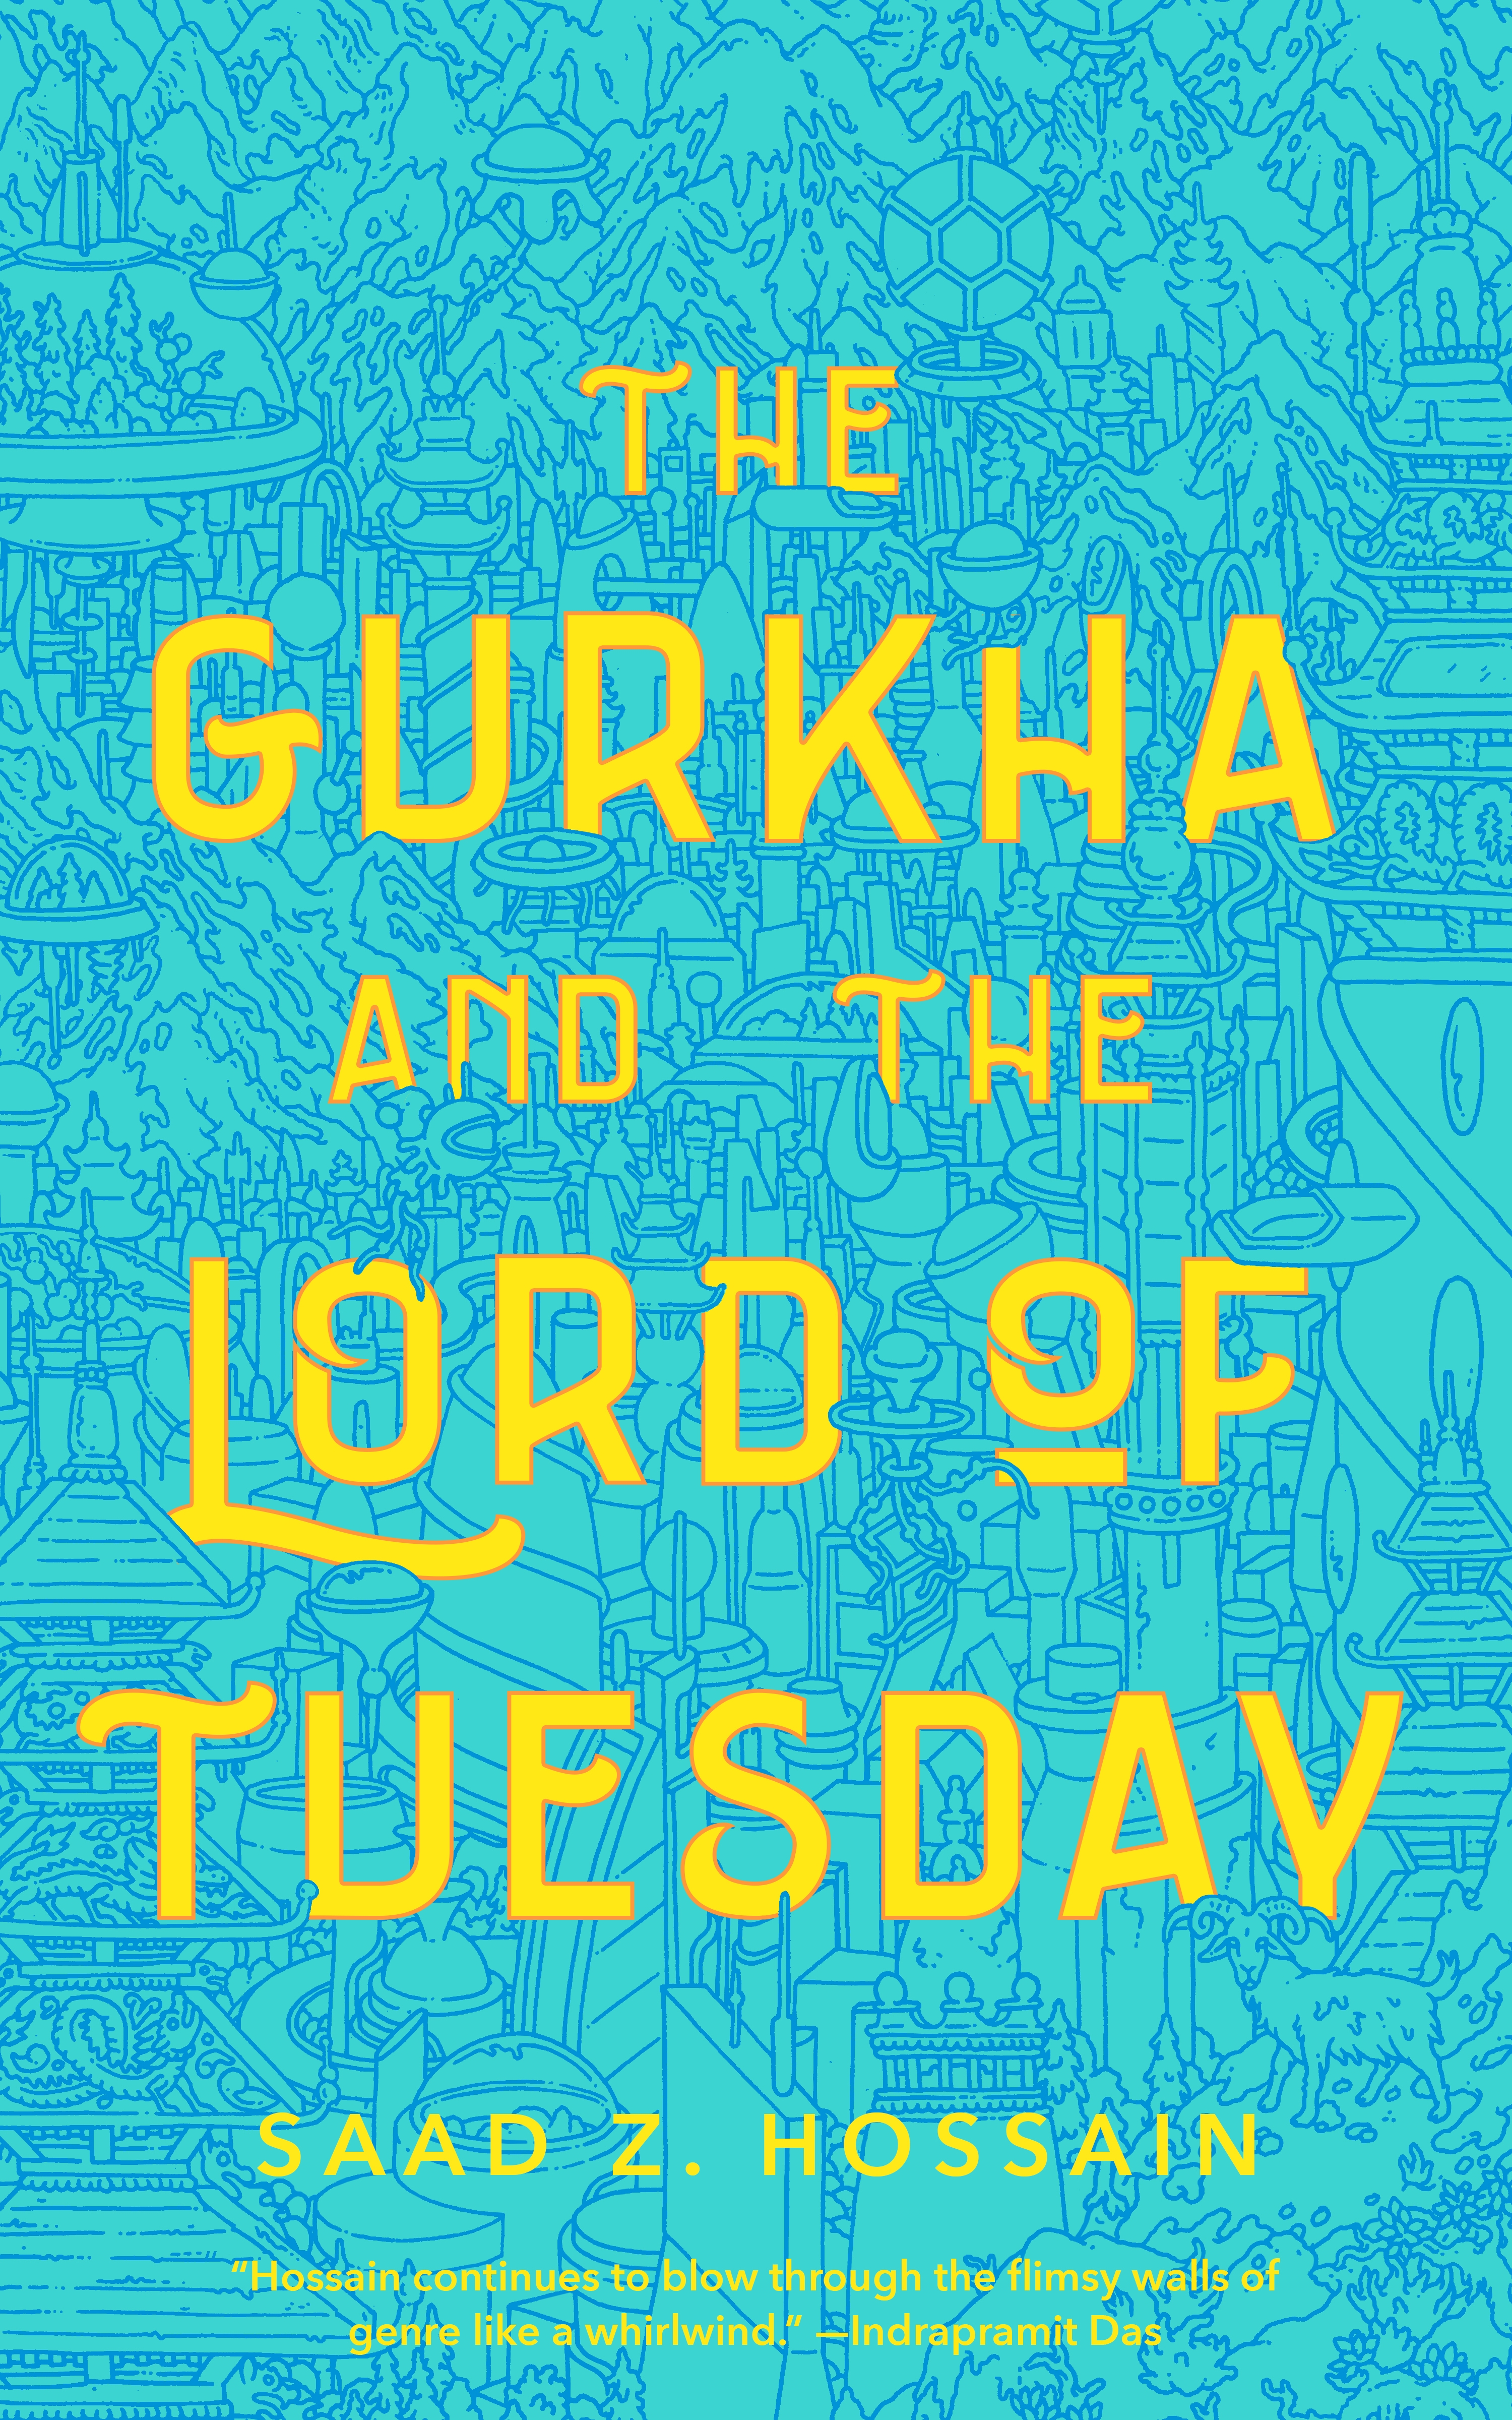 The Gurkha and the Lord of Tuesday by Saad Z. Hossain